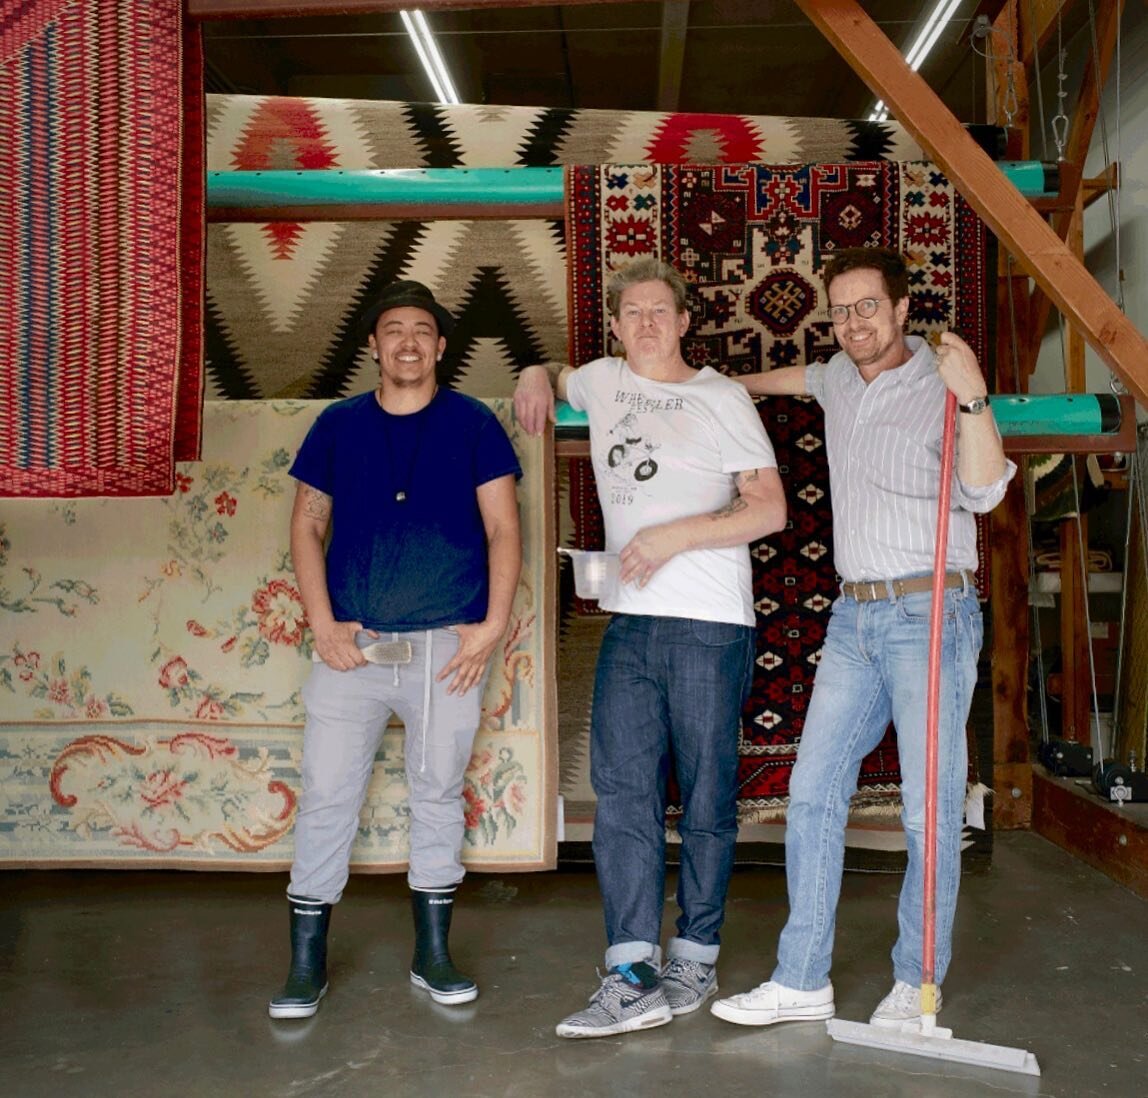 New Mexico&rsquo;s most experienced rug cleaning crew&mdash;it&rsquo;s an honor working on such amazing textiles from all over the country. Free pick up and delivery in Santa Fe &amp; Albuquerque, shipping nationwide.  #navajorug #orientalrug #newmex